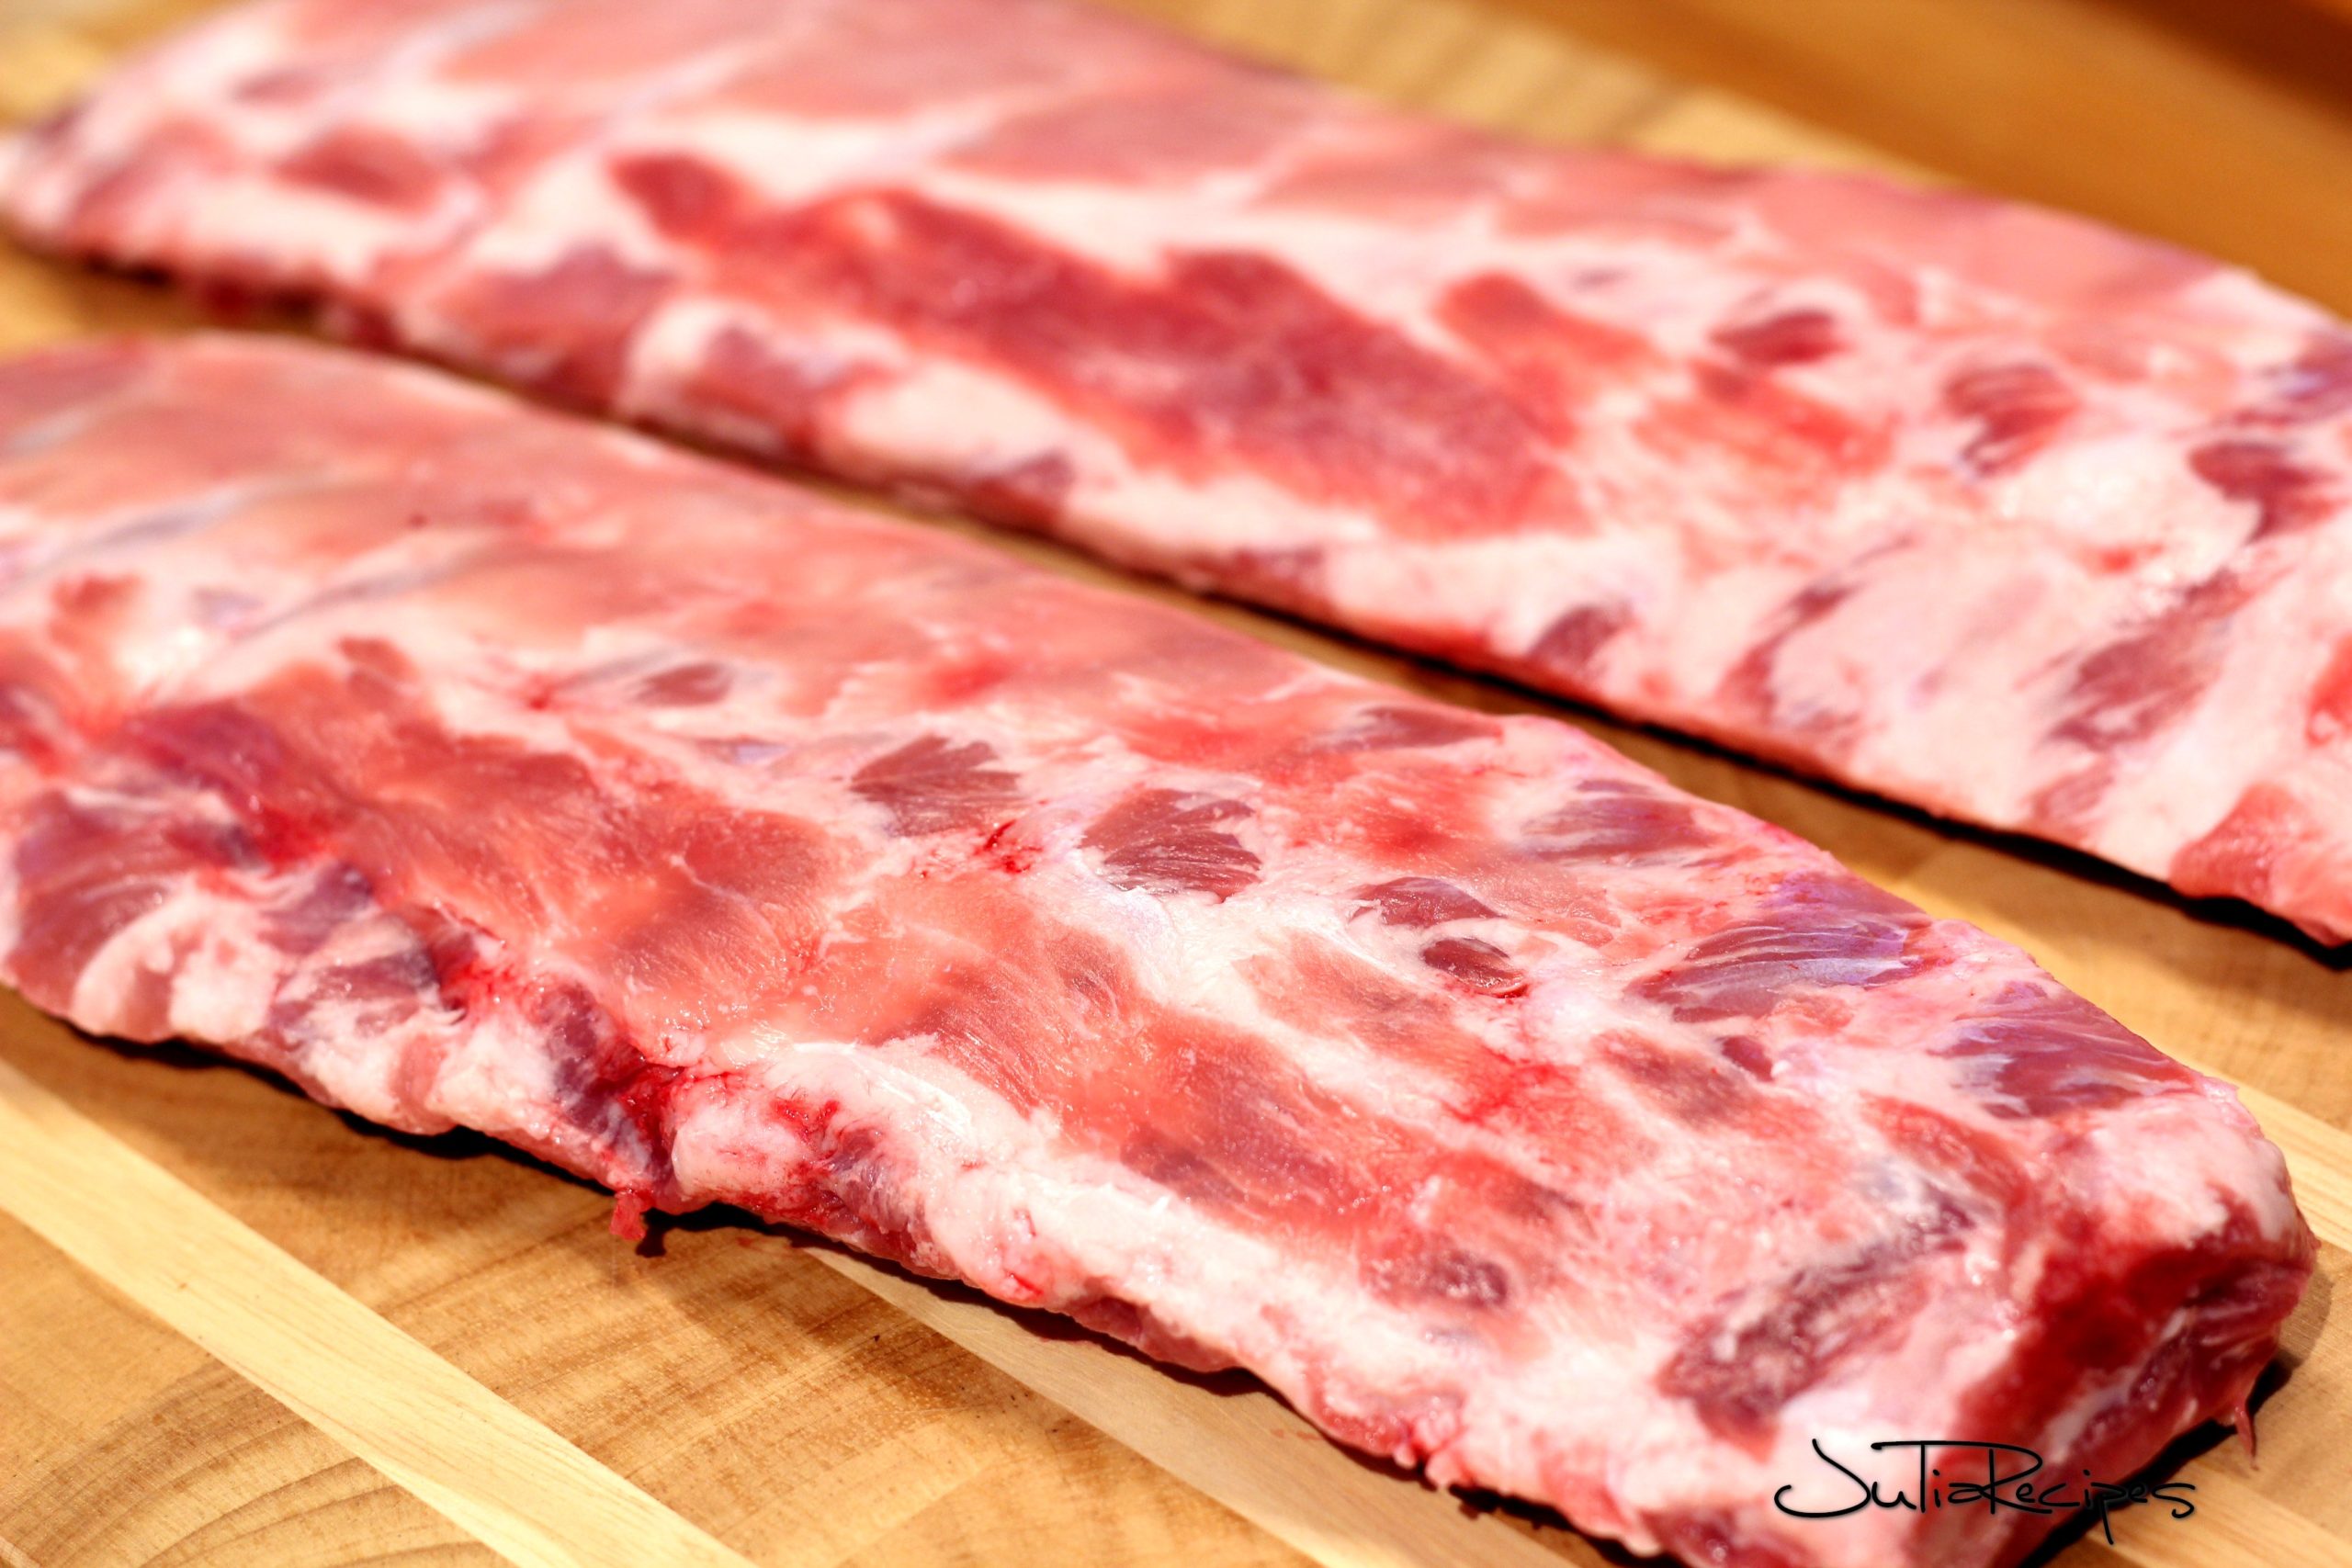 removing membrane from pork ribs